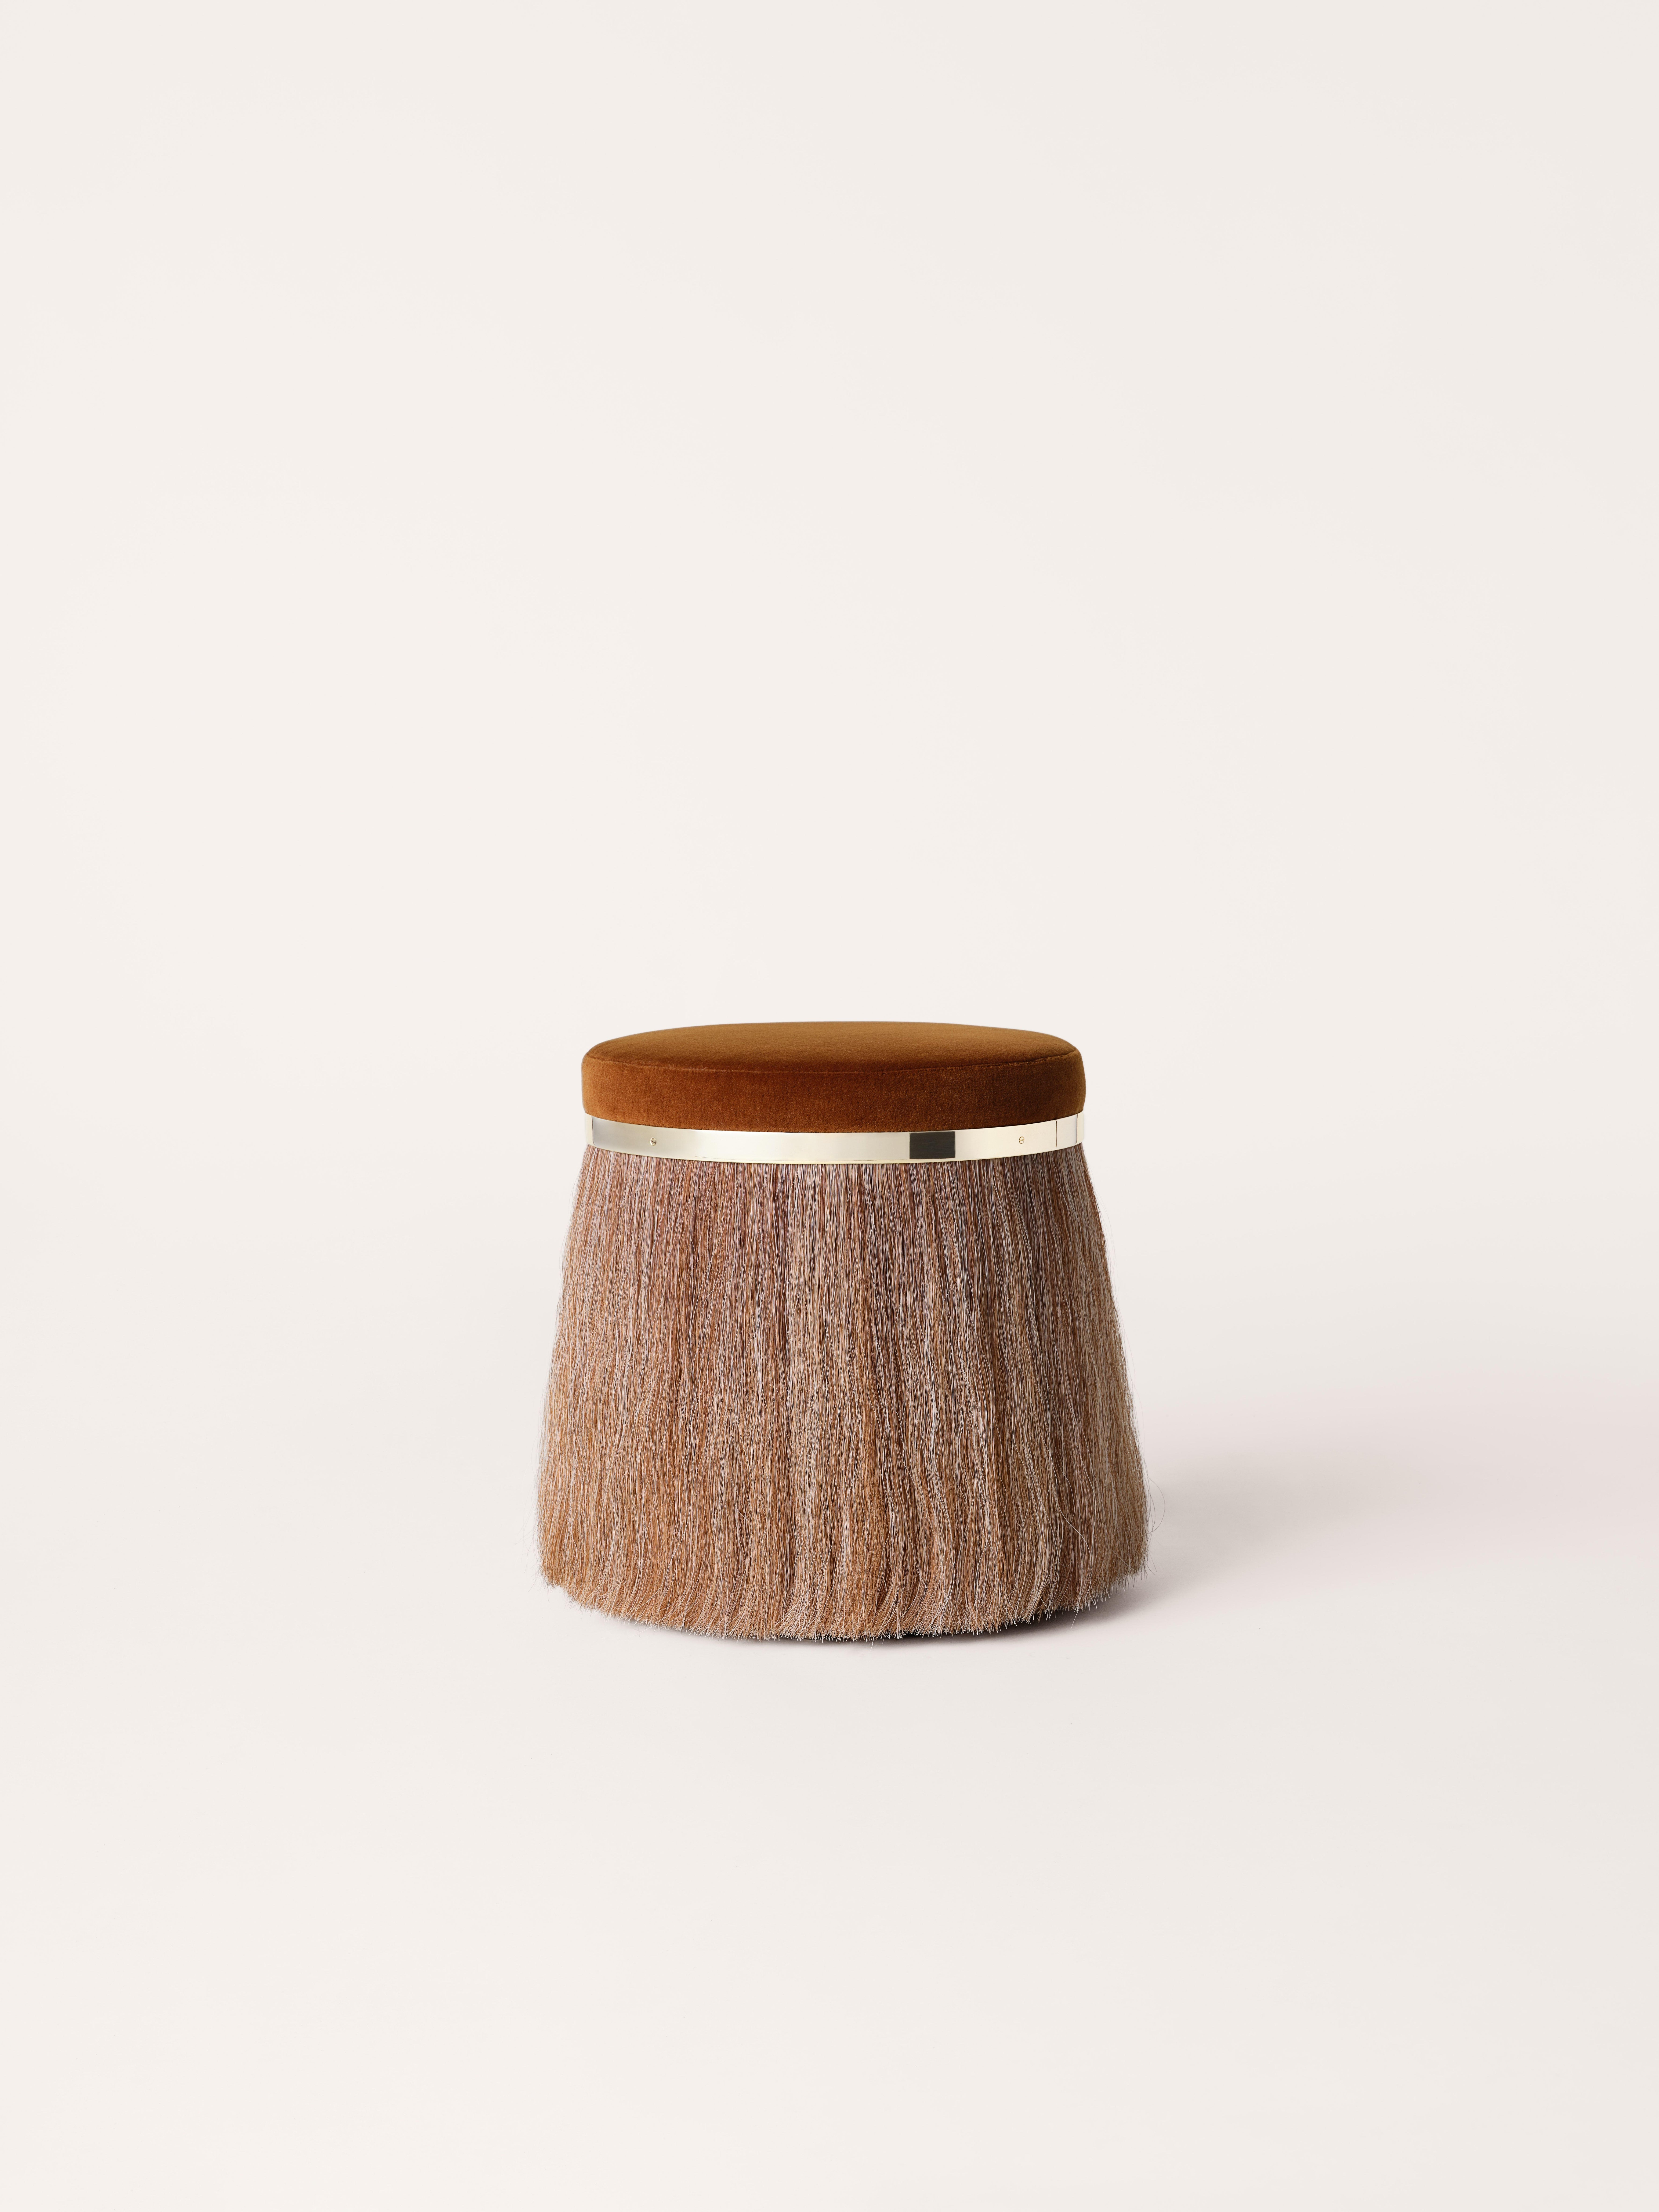 The Thing stools are available in four different styles and feature hand-upholstered tops, solid brass rings and horse hair. Refined yet wild, Thing 1's unique personality is accentuated with a distinctive combination of contrasting materials.